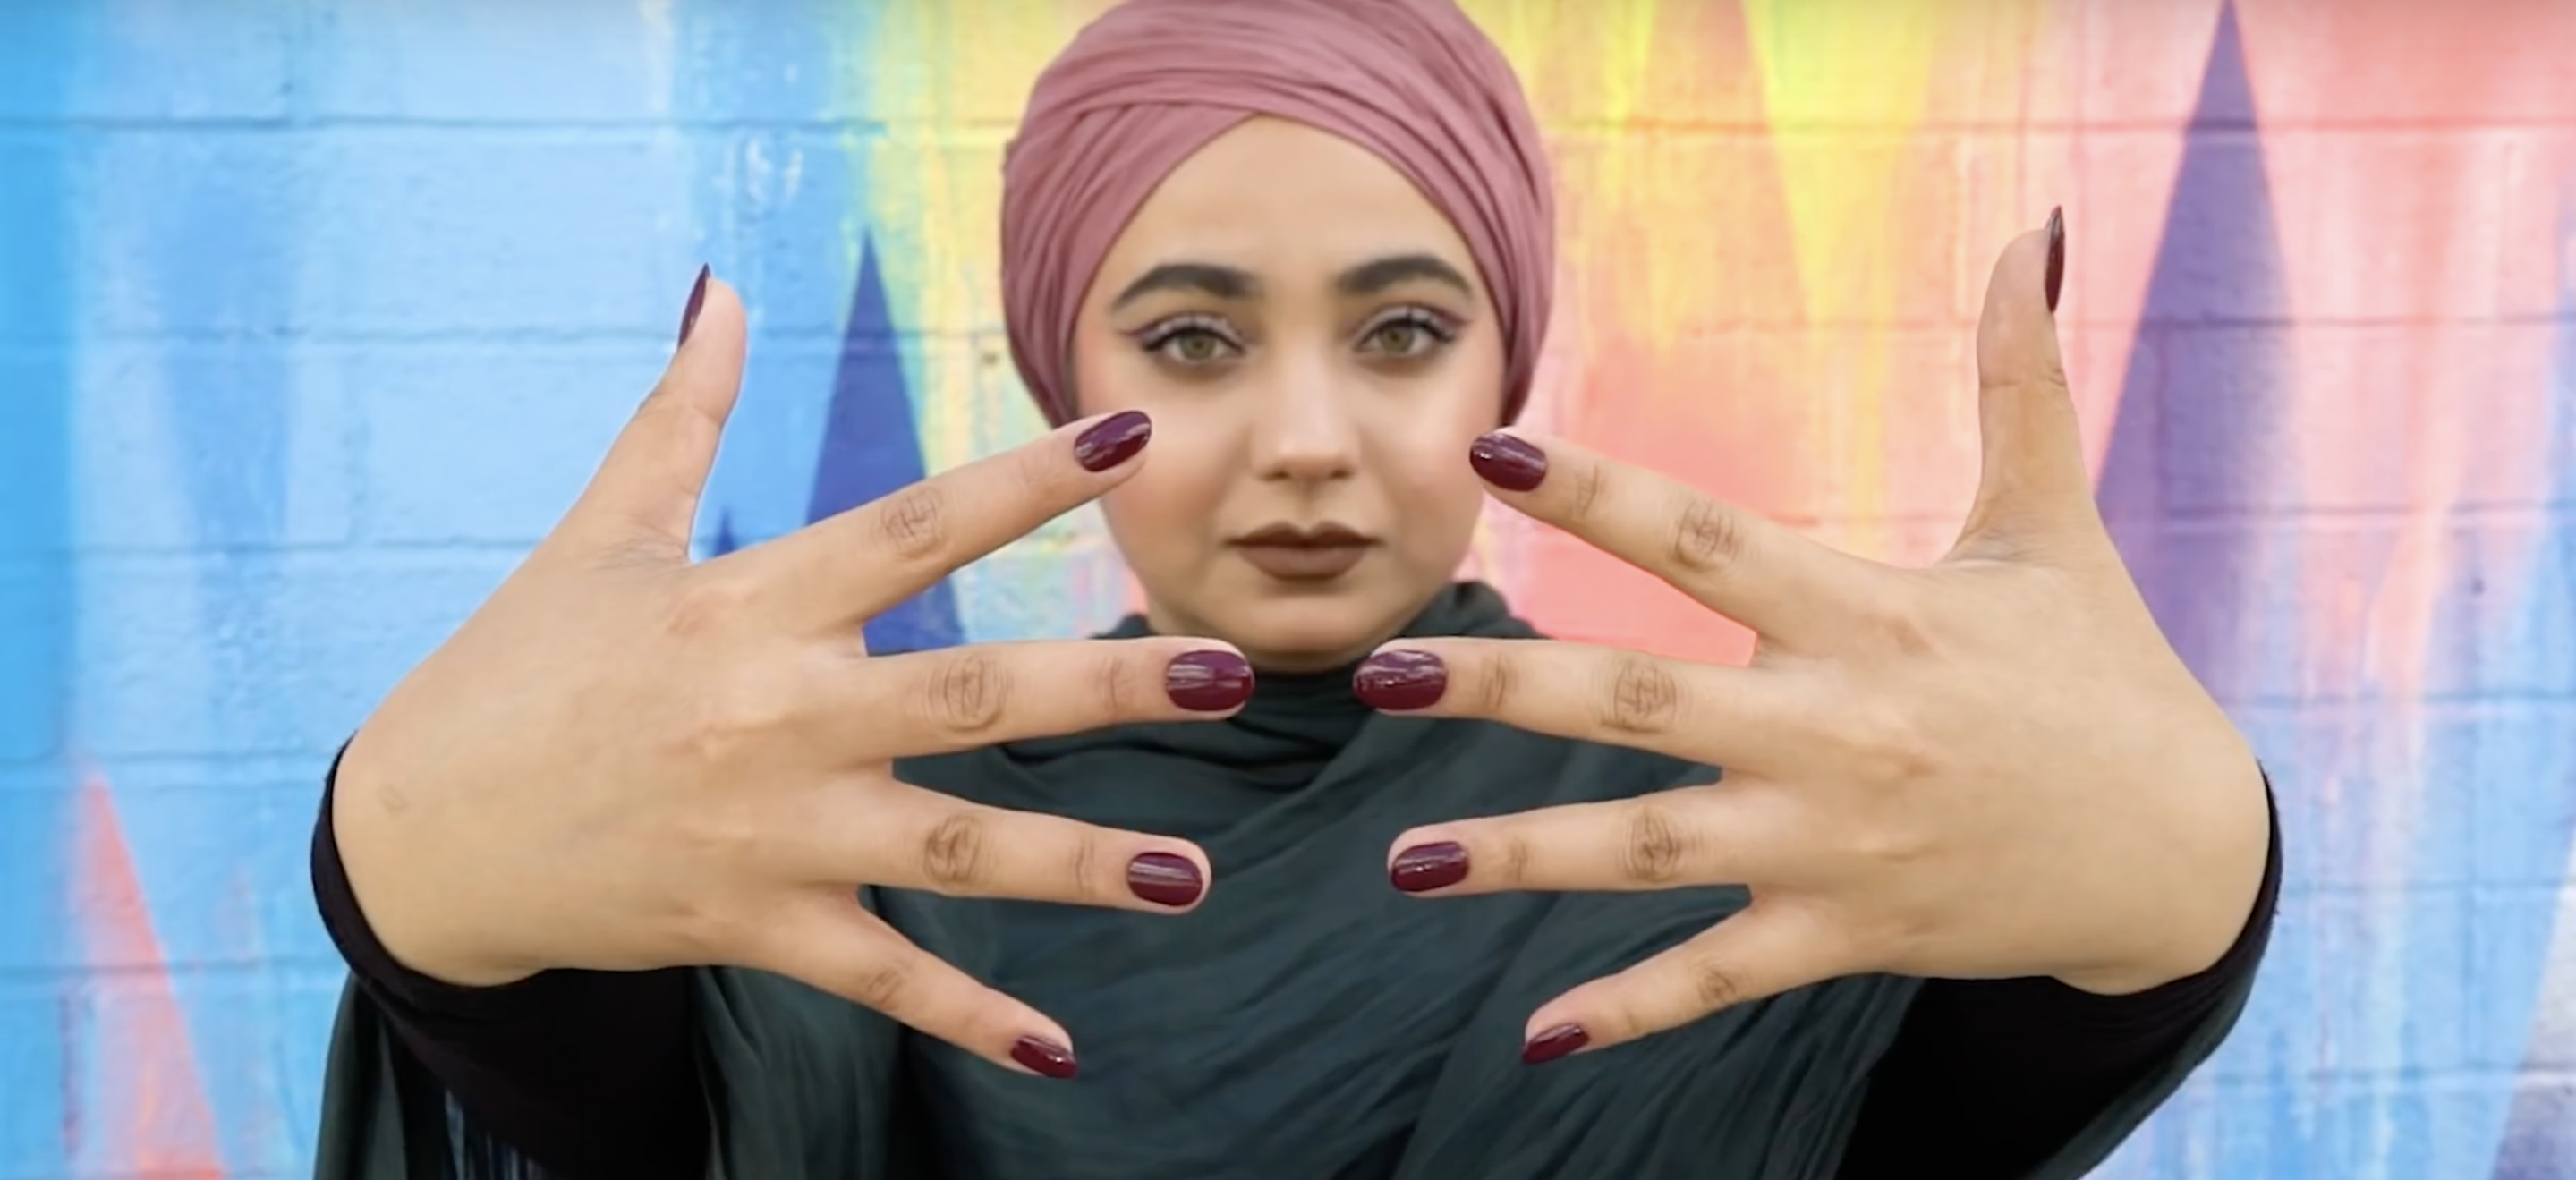 Your Official Guide On Halal Nail Polish, So You Can Flaunt Those Nails!